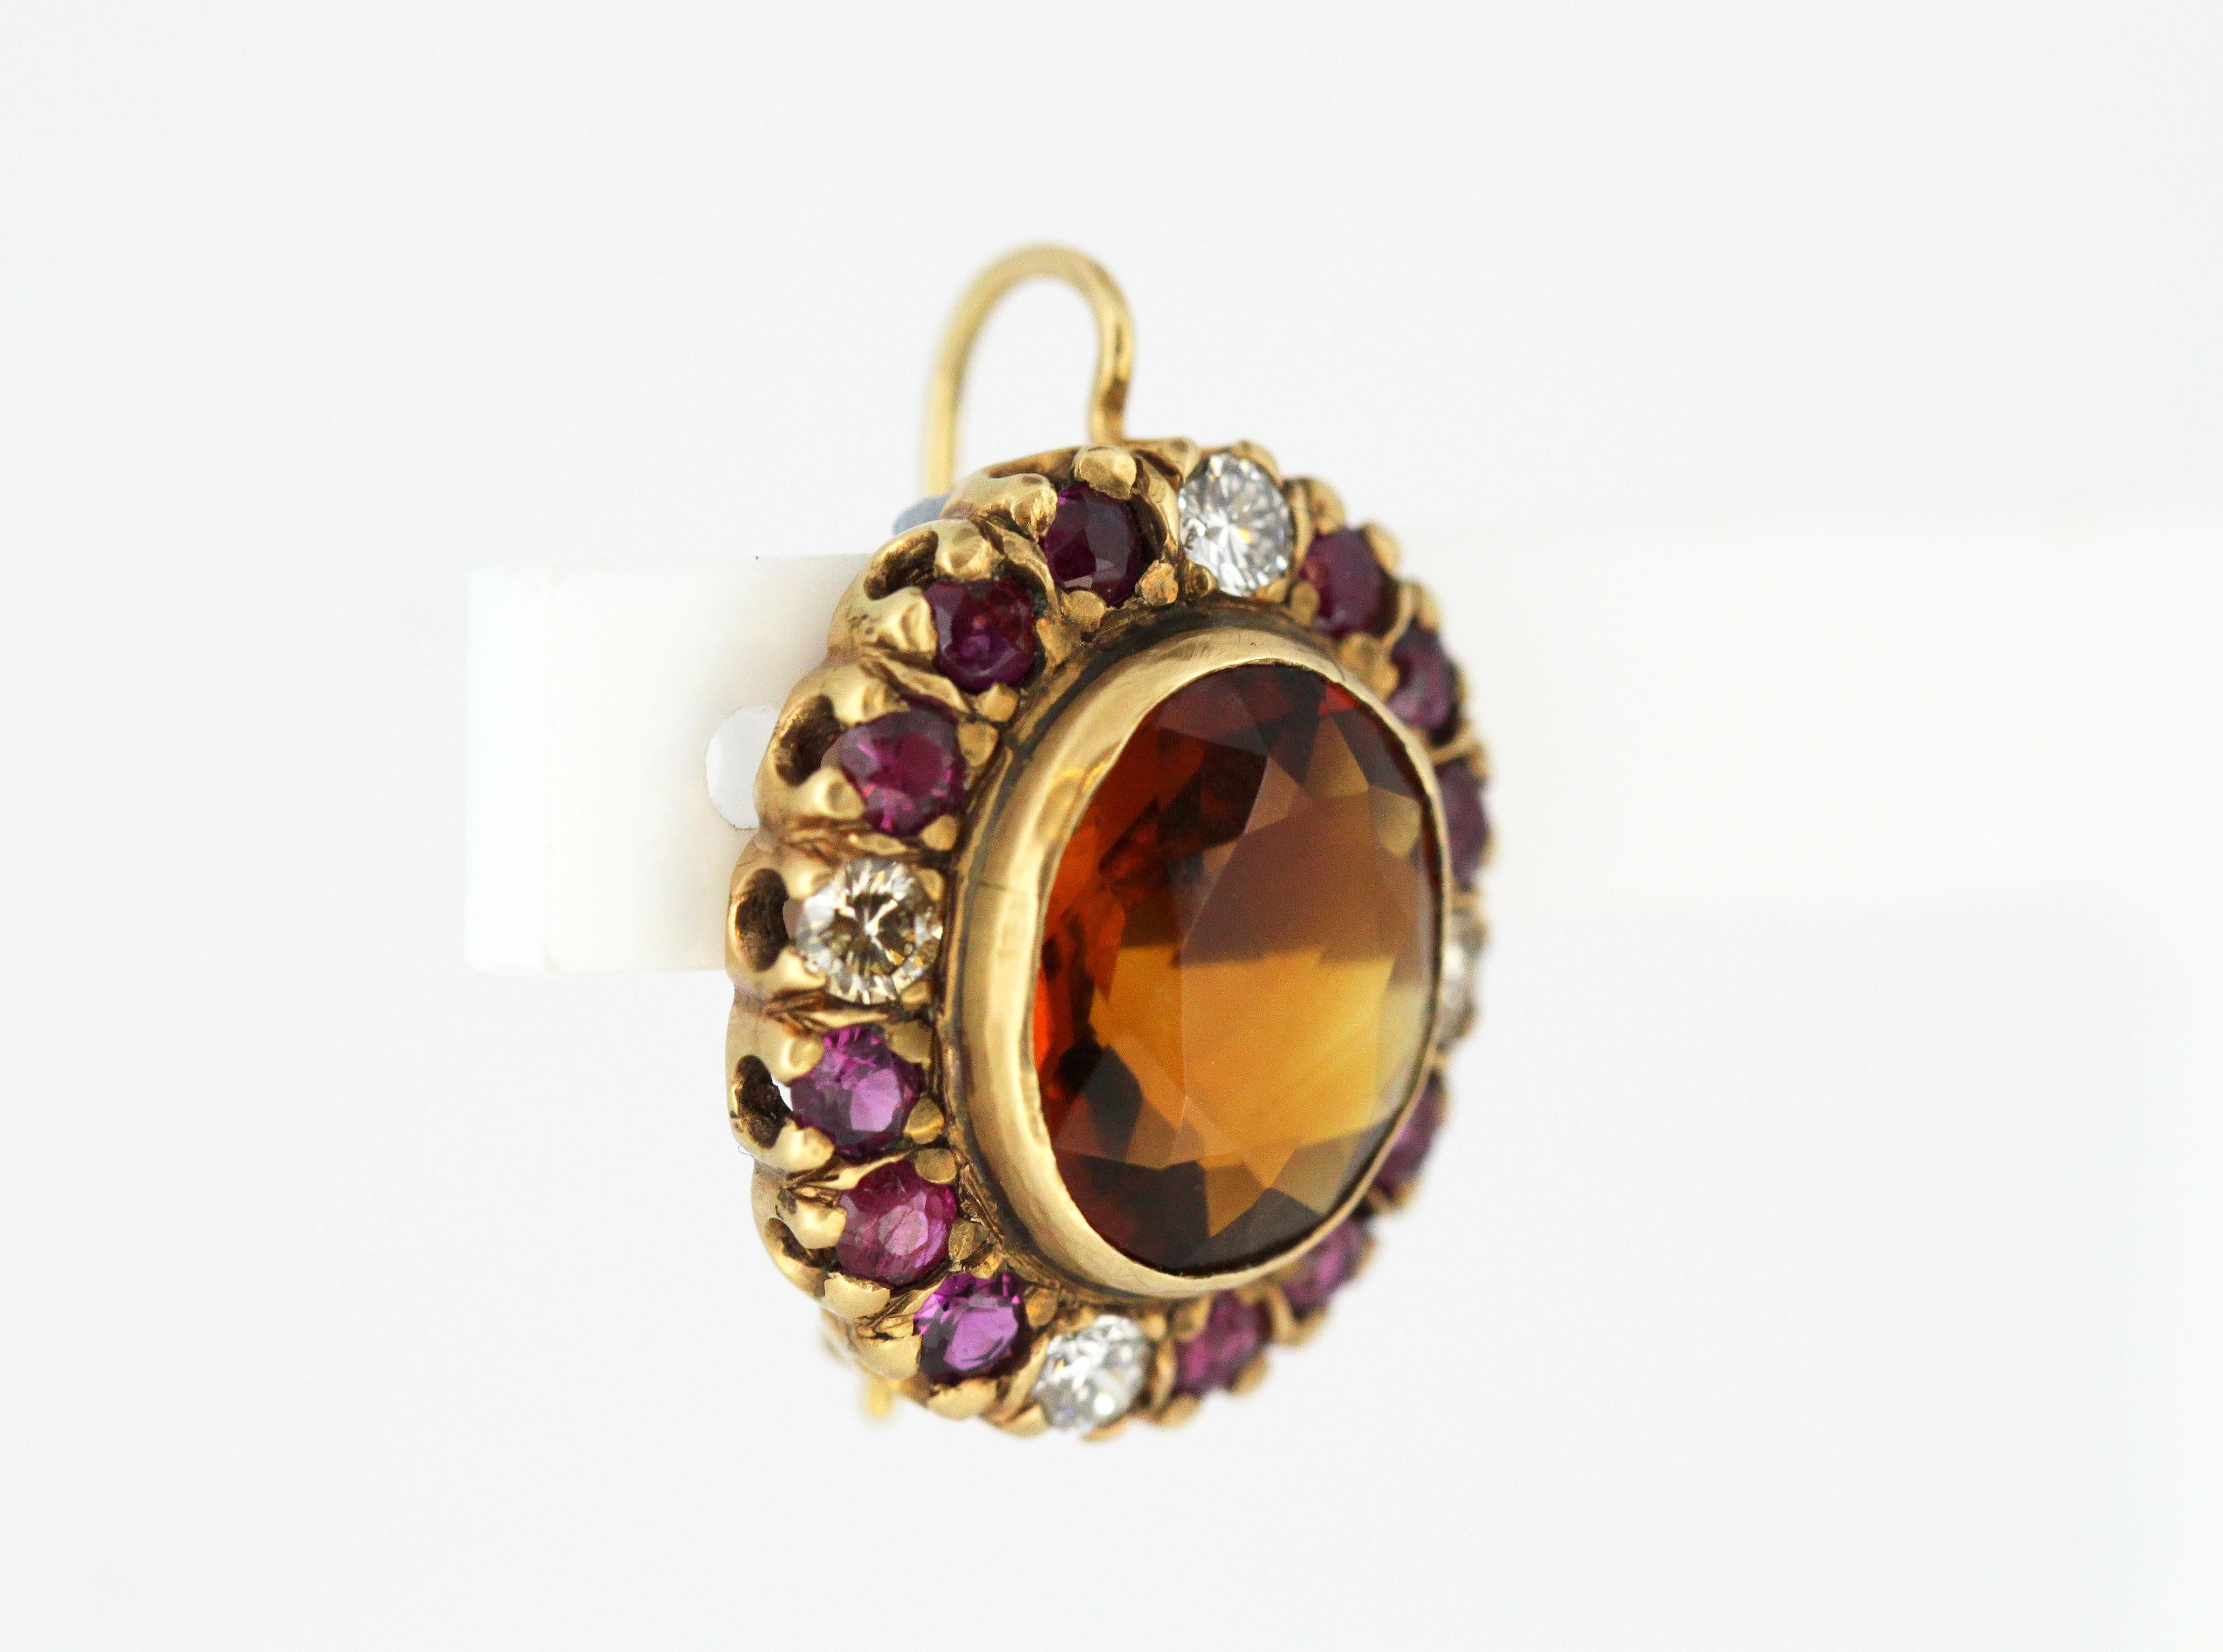 18kt Yellow Gold Ladies Clip-On Earrings with Garnets, Diamonds and Rubies, 1970 1